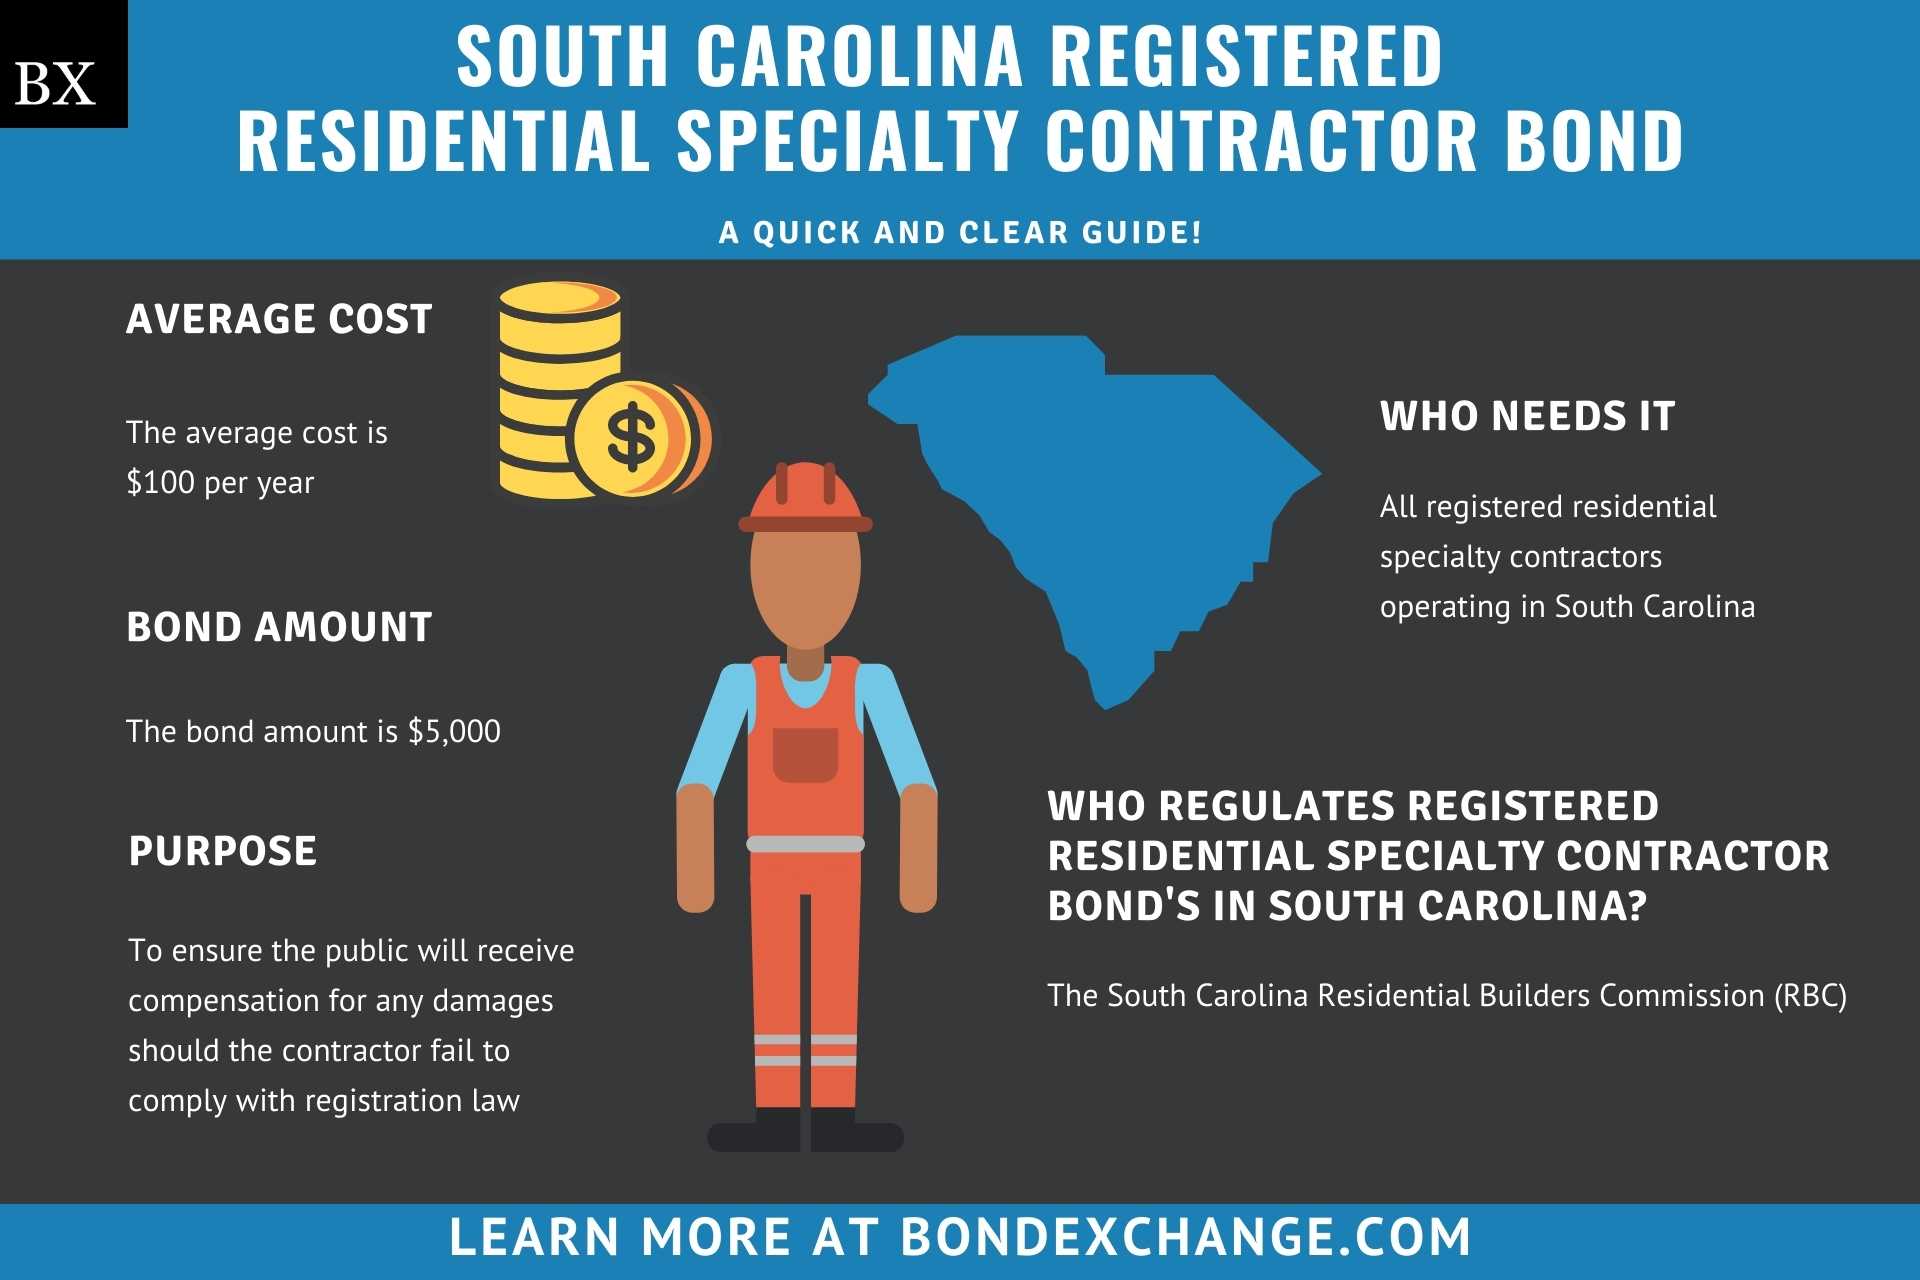 South Carolina Registered Residential Specialty Contractor Bond